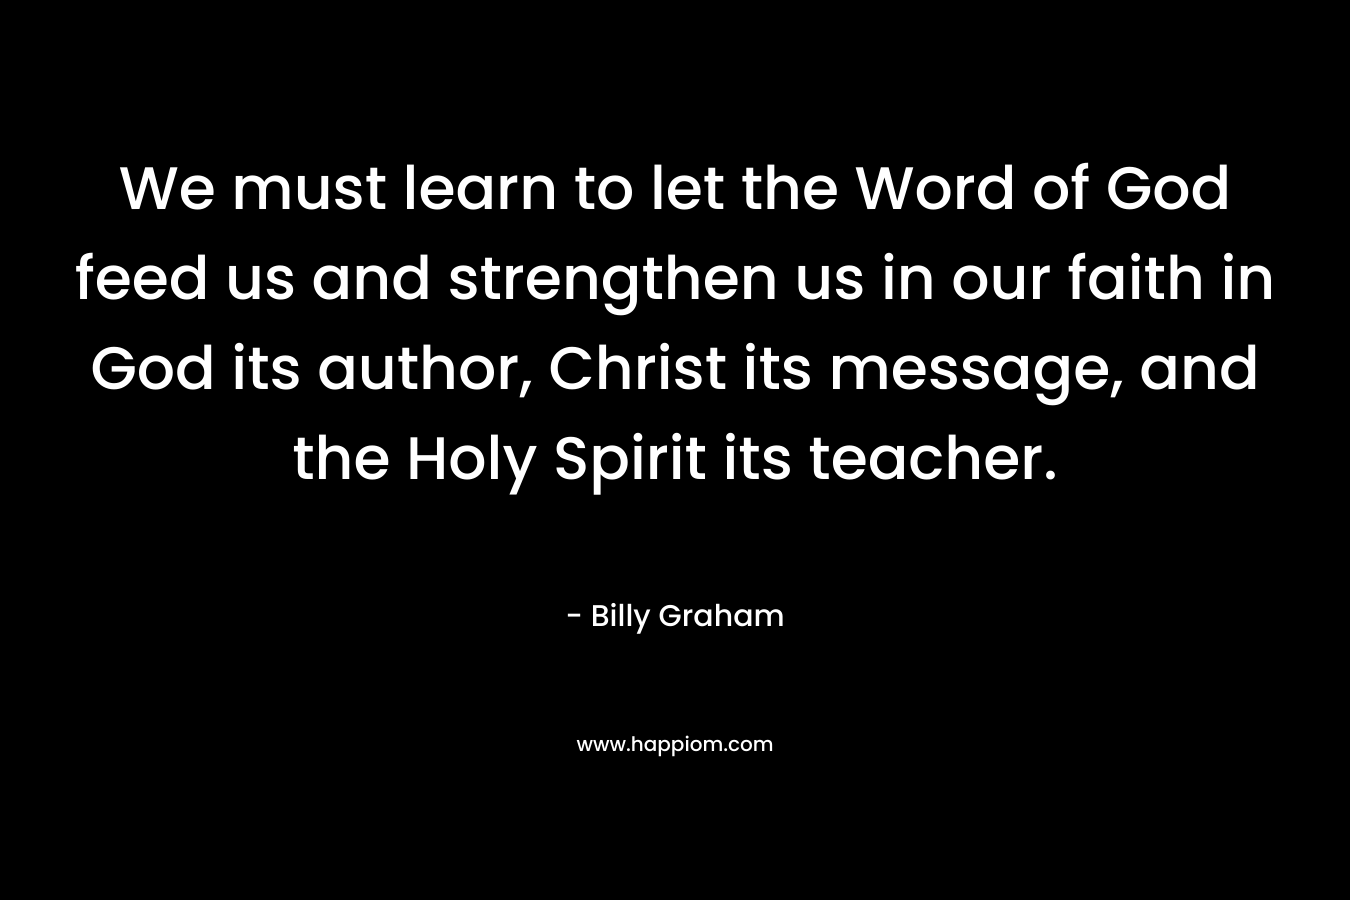 We must learn to let the Word of God feed us and strengthen us in our faith in God its author, Christ its message, and the Holy Spirit its teacher.